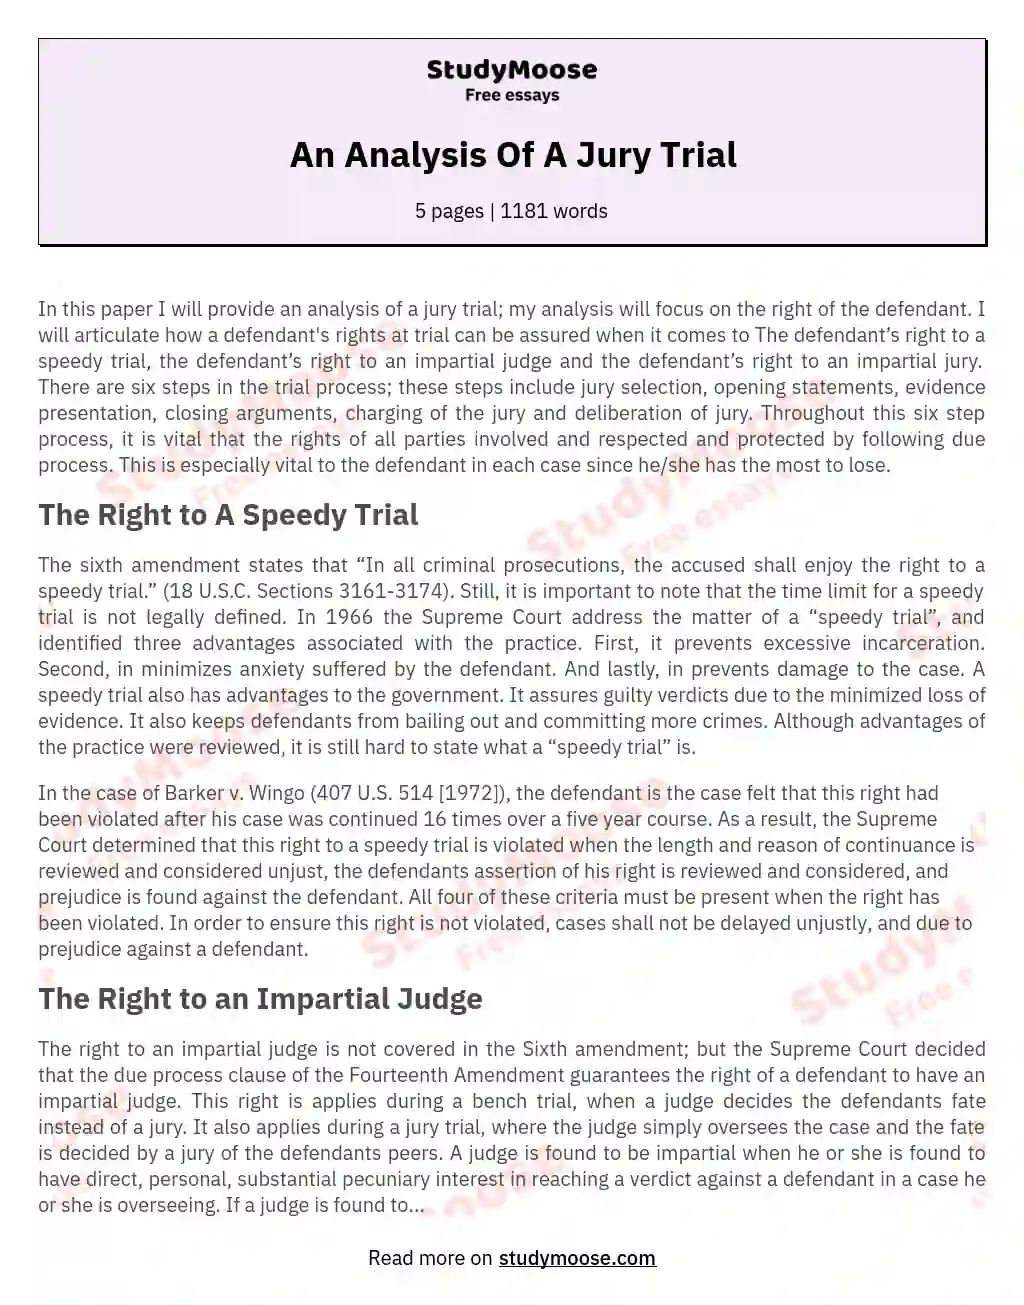 An Analysis Of A Jury Trial essay